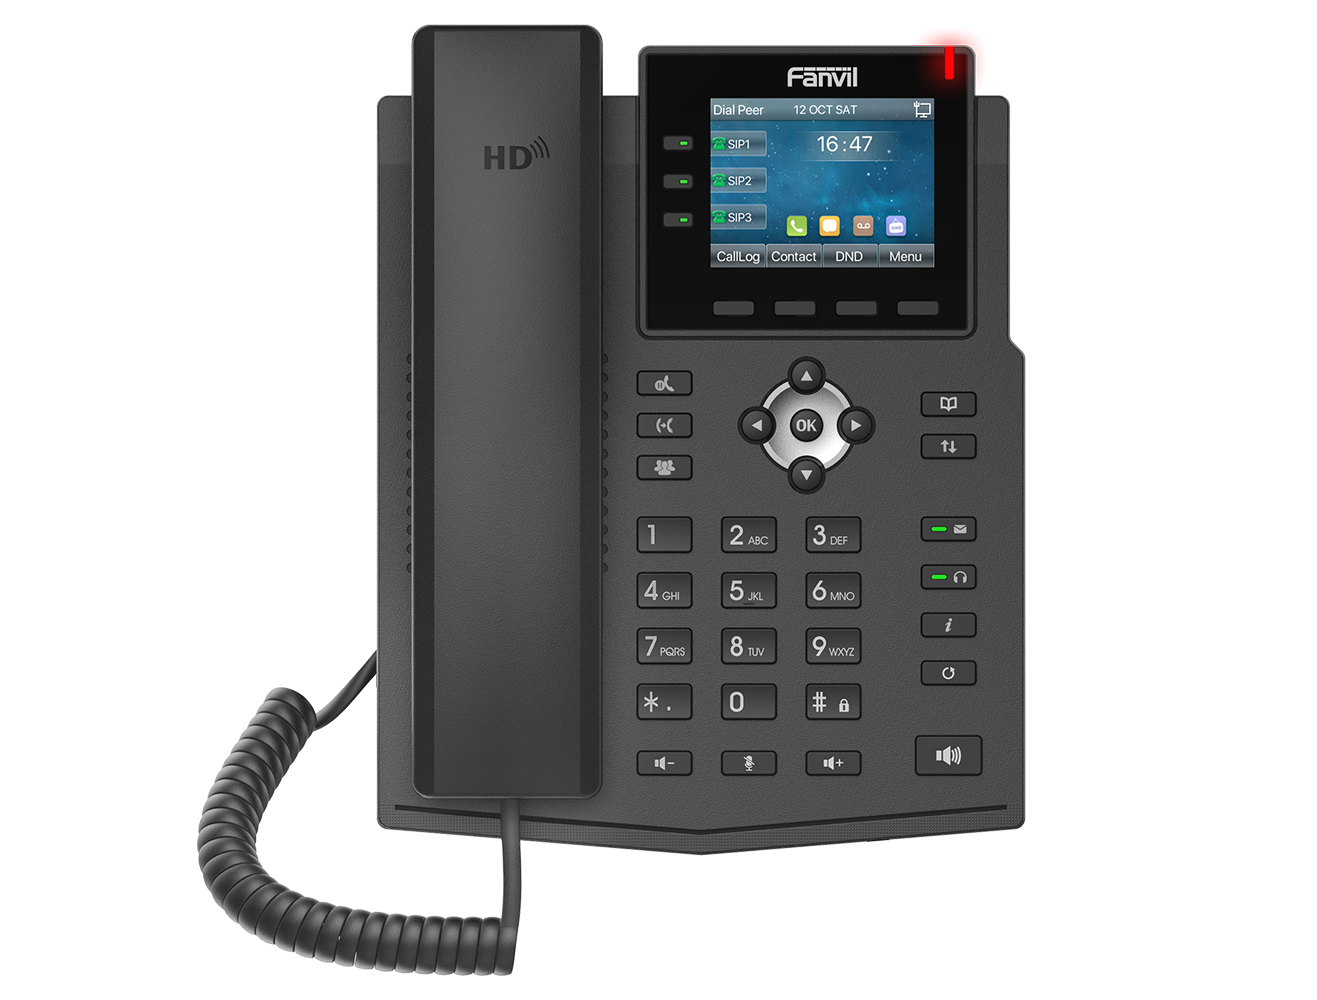 How big is the screen size of the Fanvil X3U Pro Entry-level Gigabit VoIP Phone?